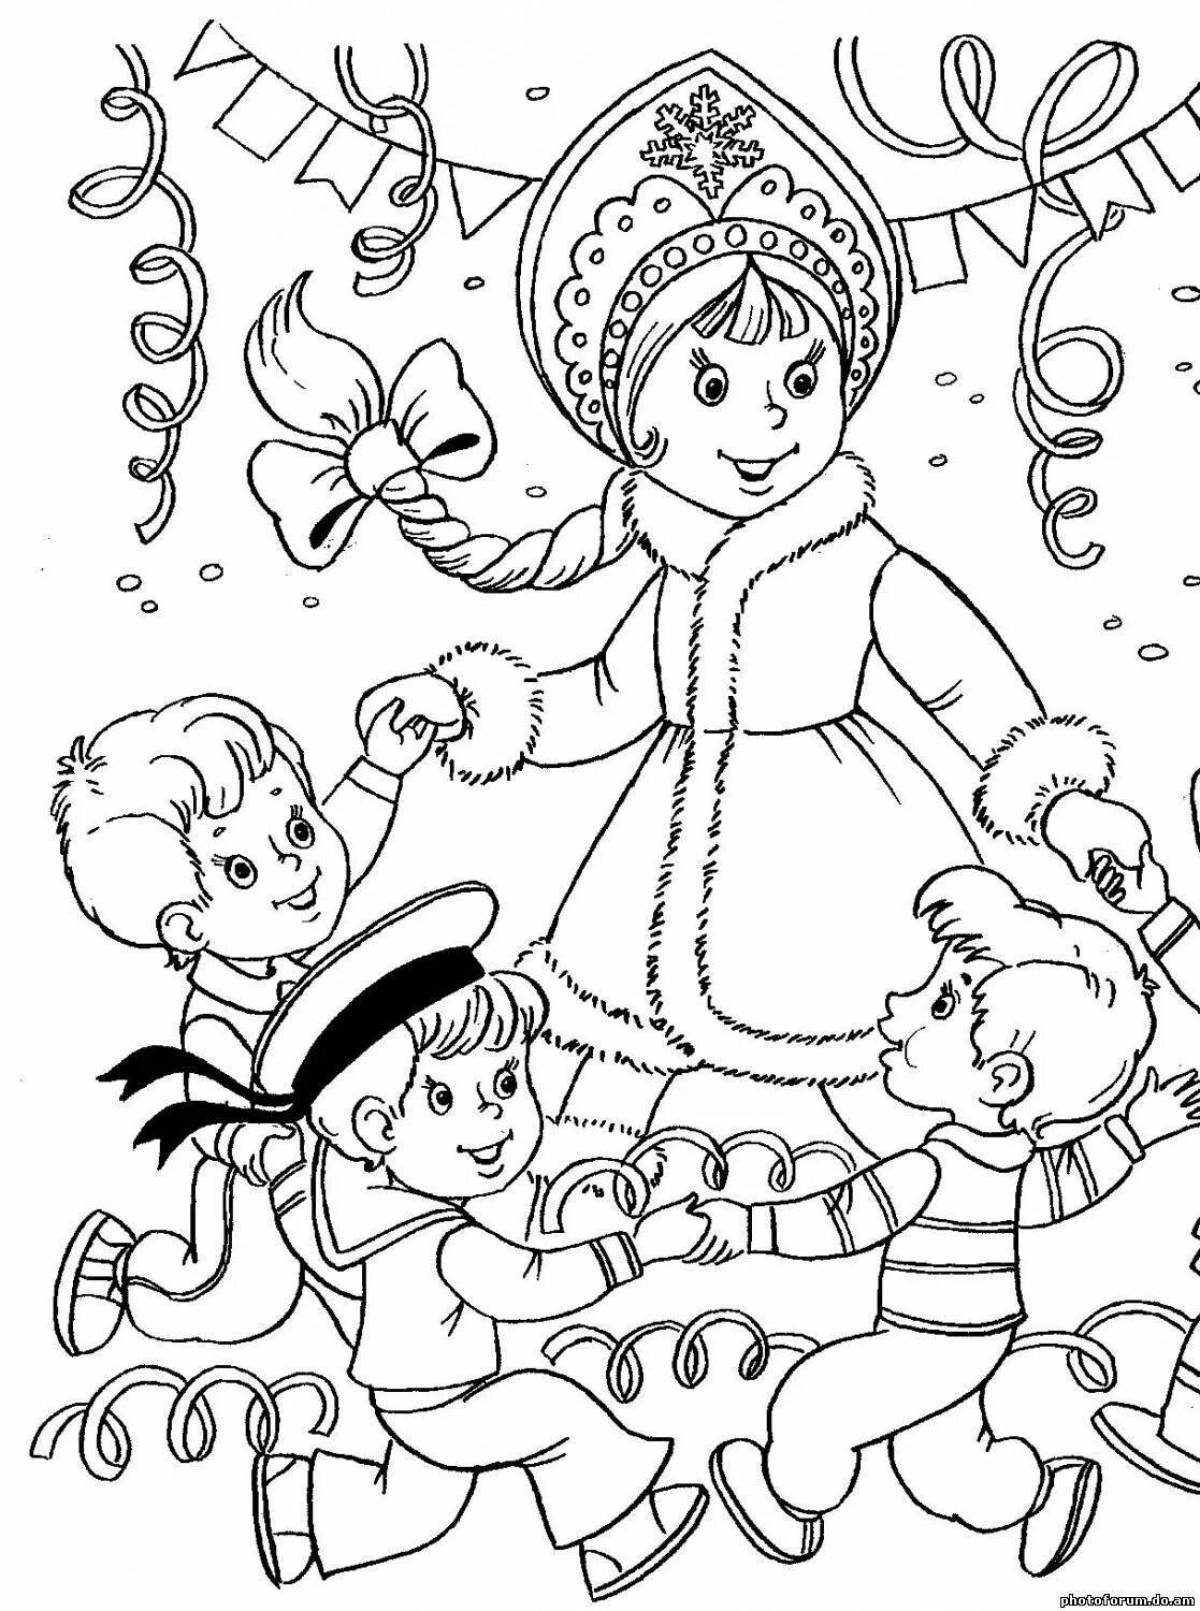 Exciting round dance around the tree coloring book